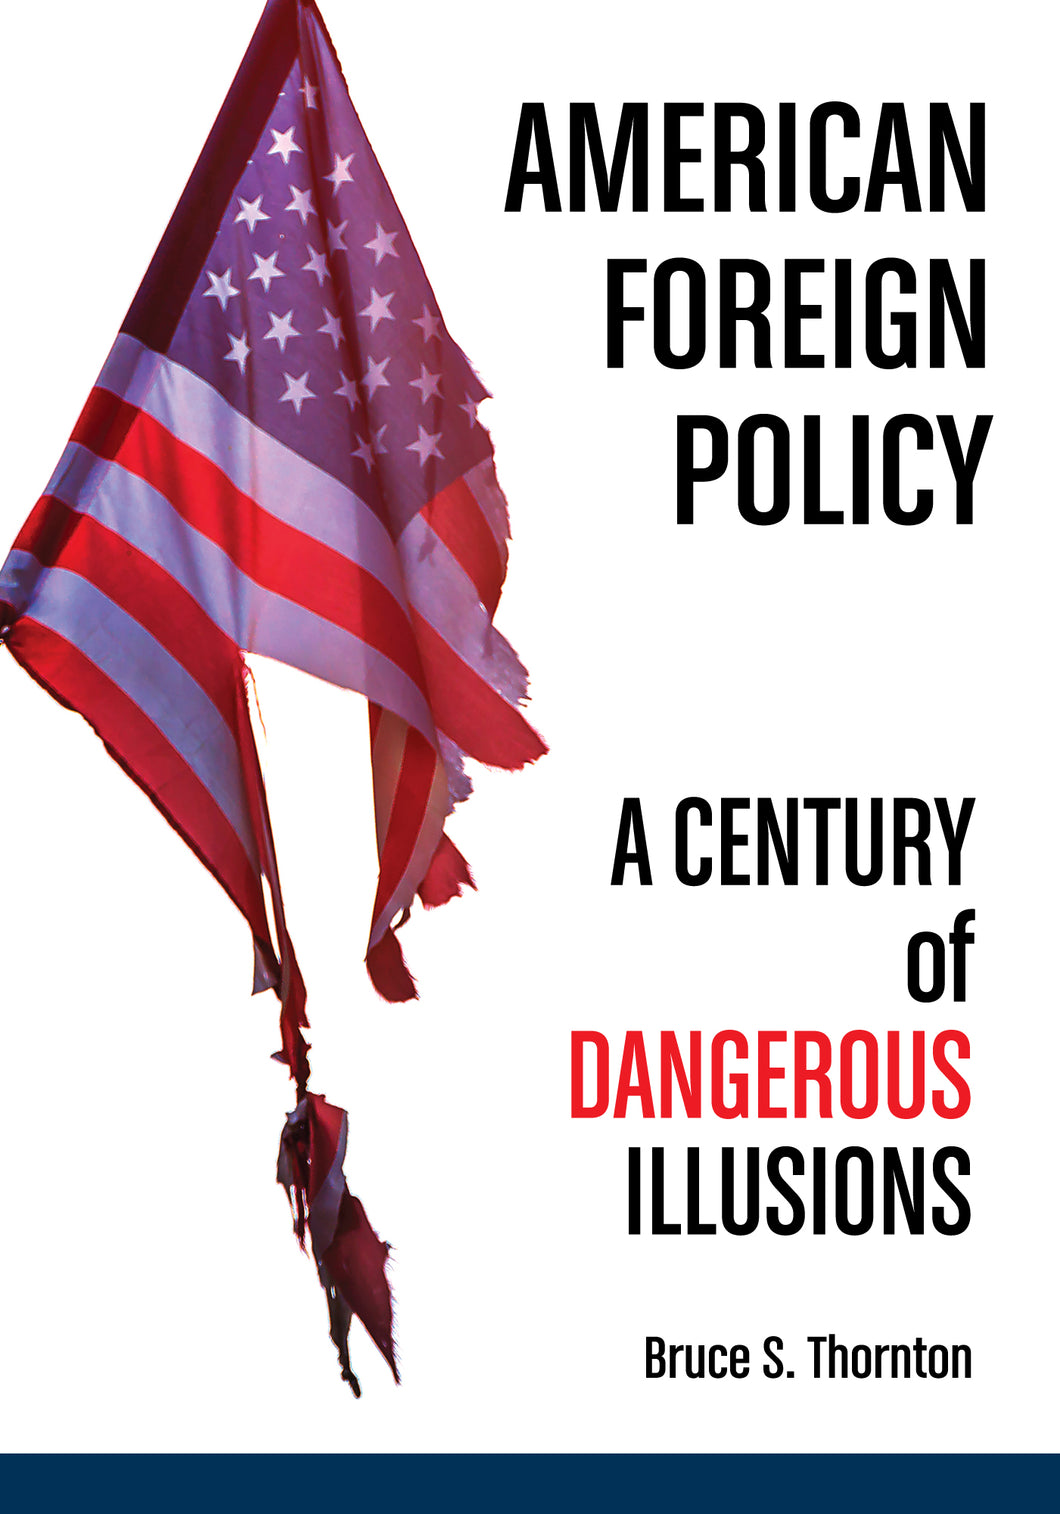 American Foreign Policy: A Century of Dangerous Illusions